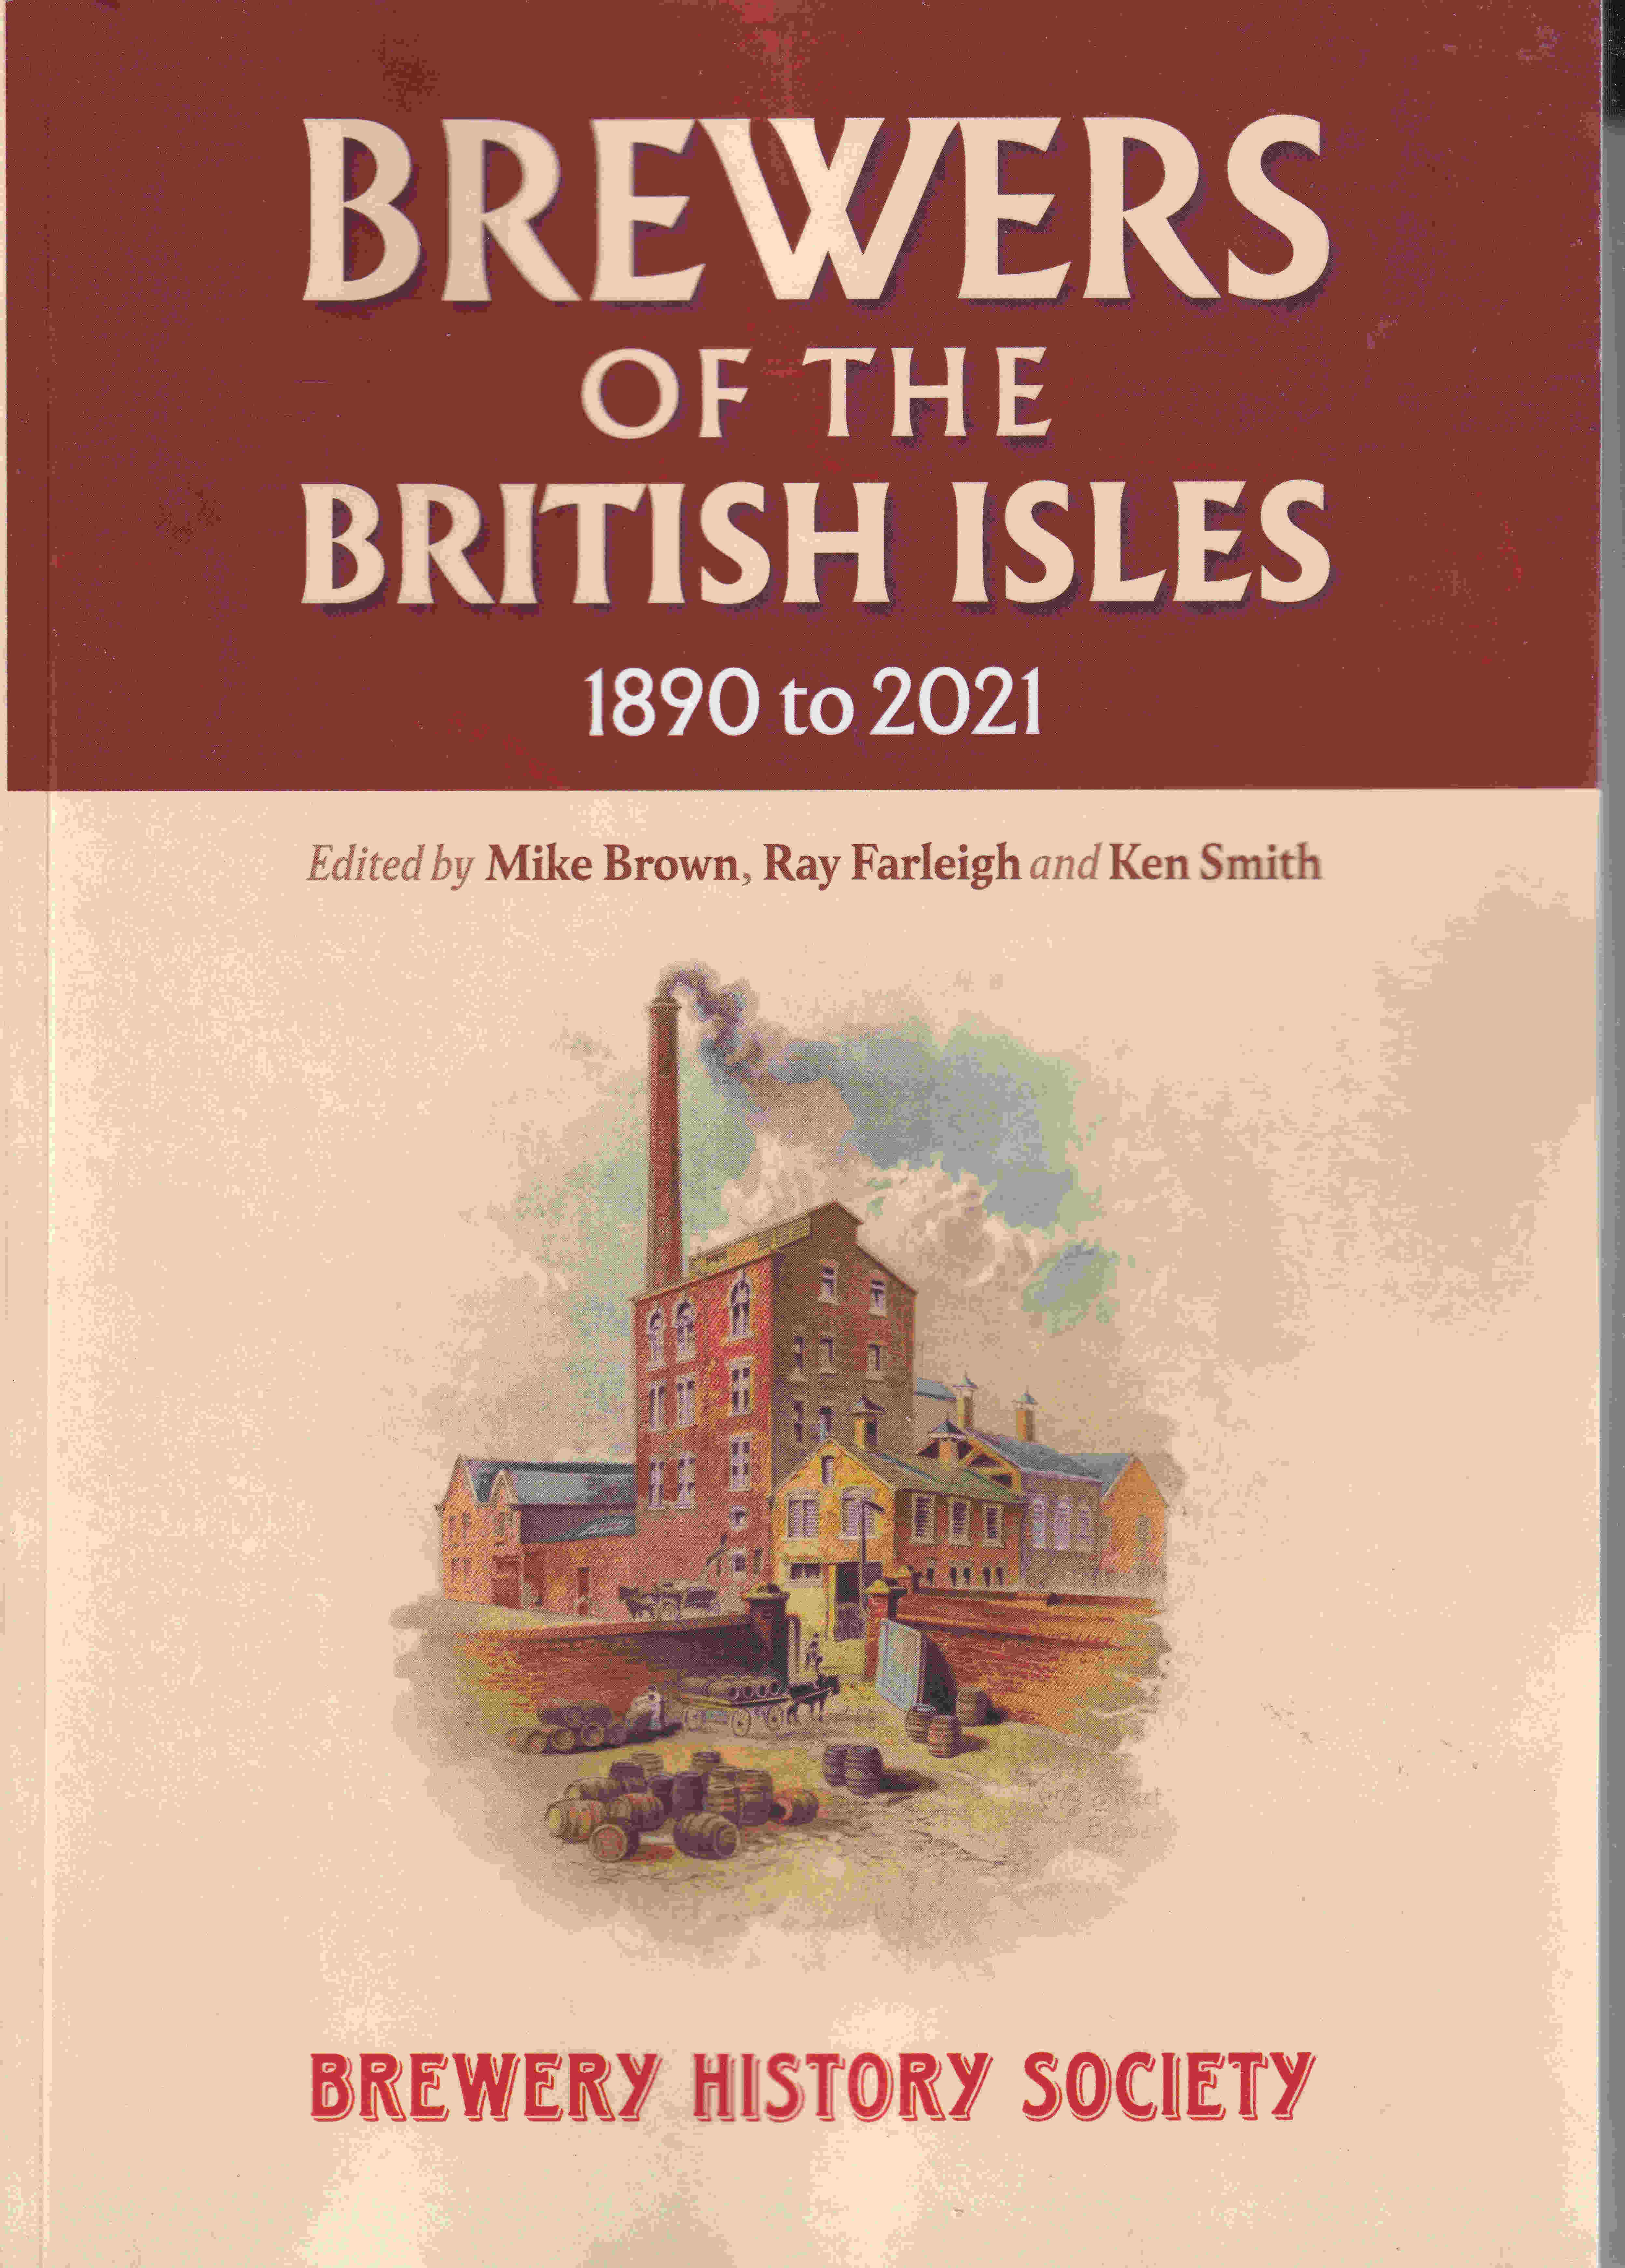 Brewers of the British Isles